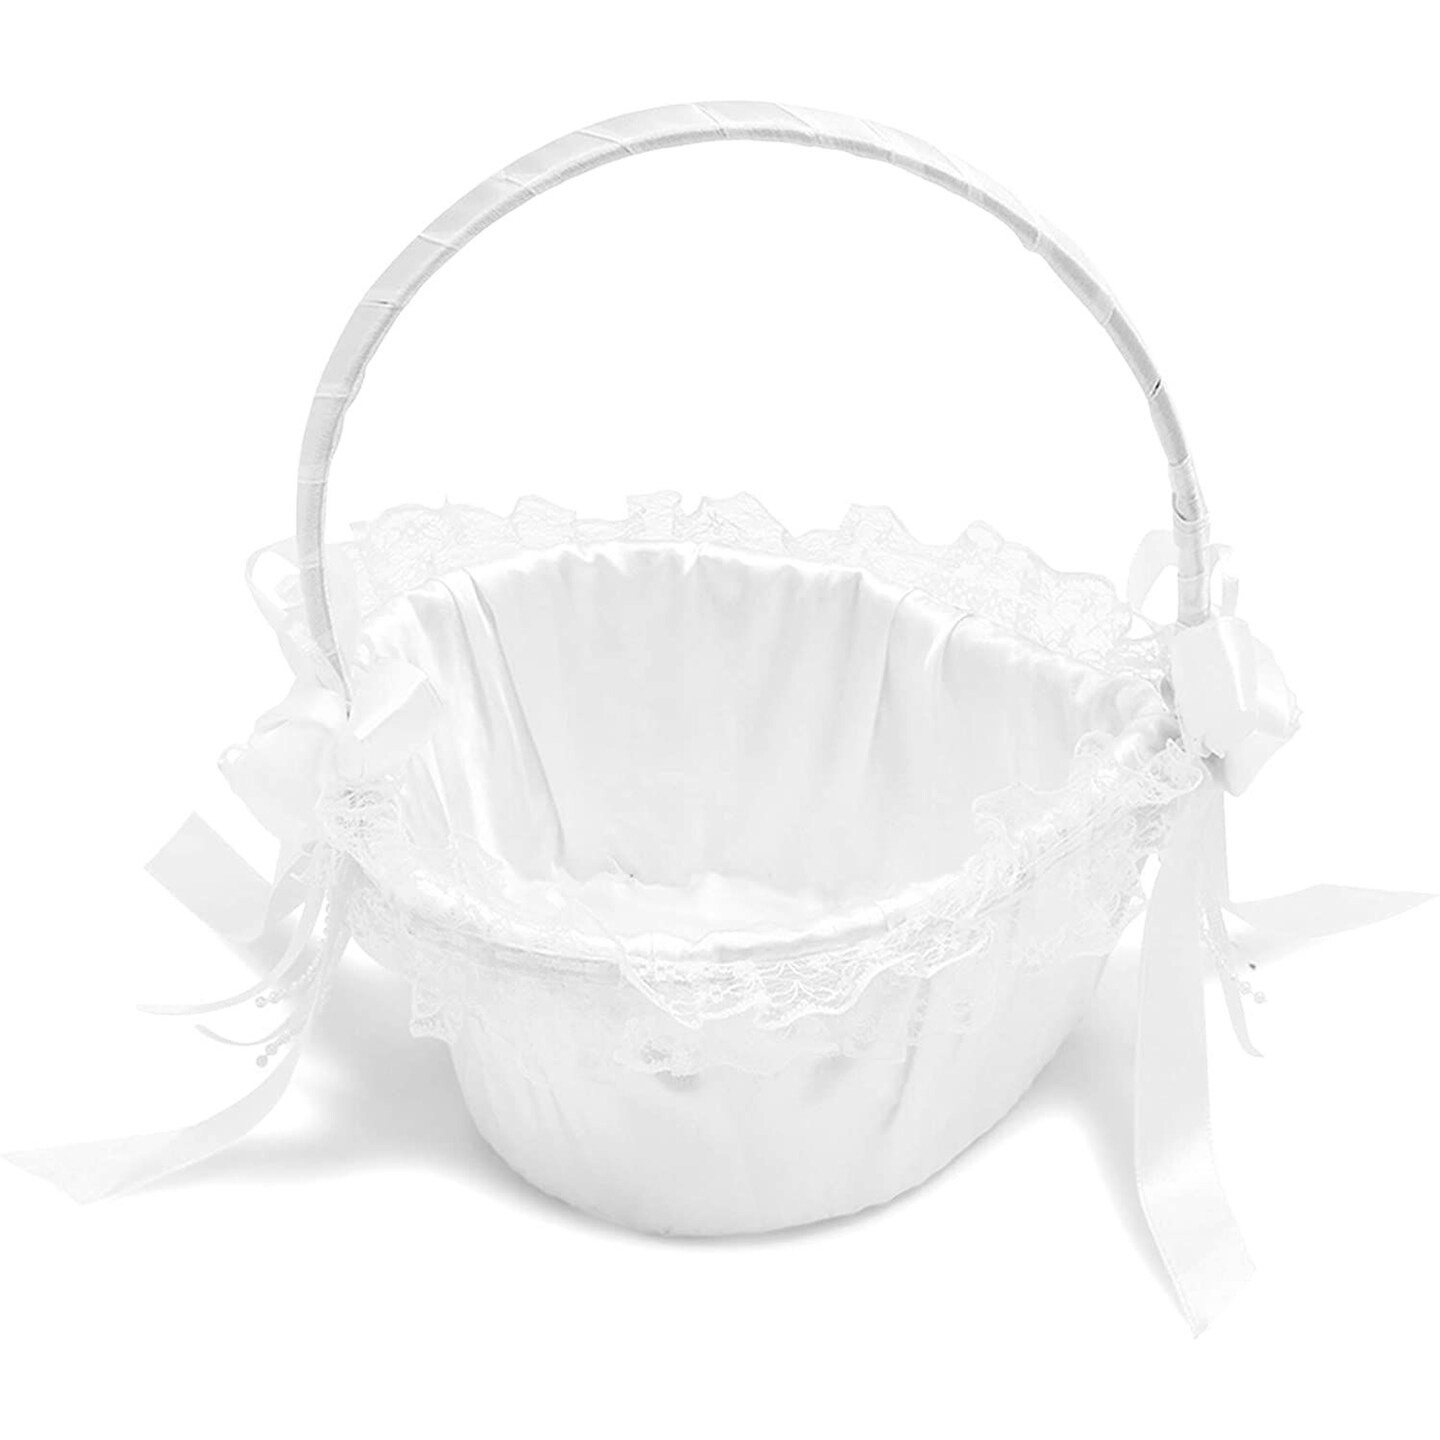 White Flower Girl Basket for Weddings - Heart-Shaped Flower Pedal Basket with Lace and Bows (6.2 x 8.7 x 7 In)